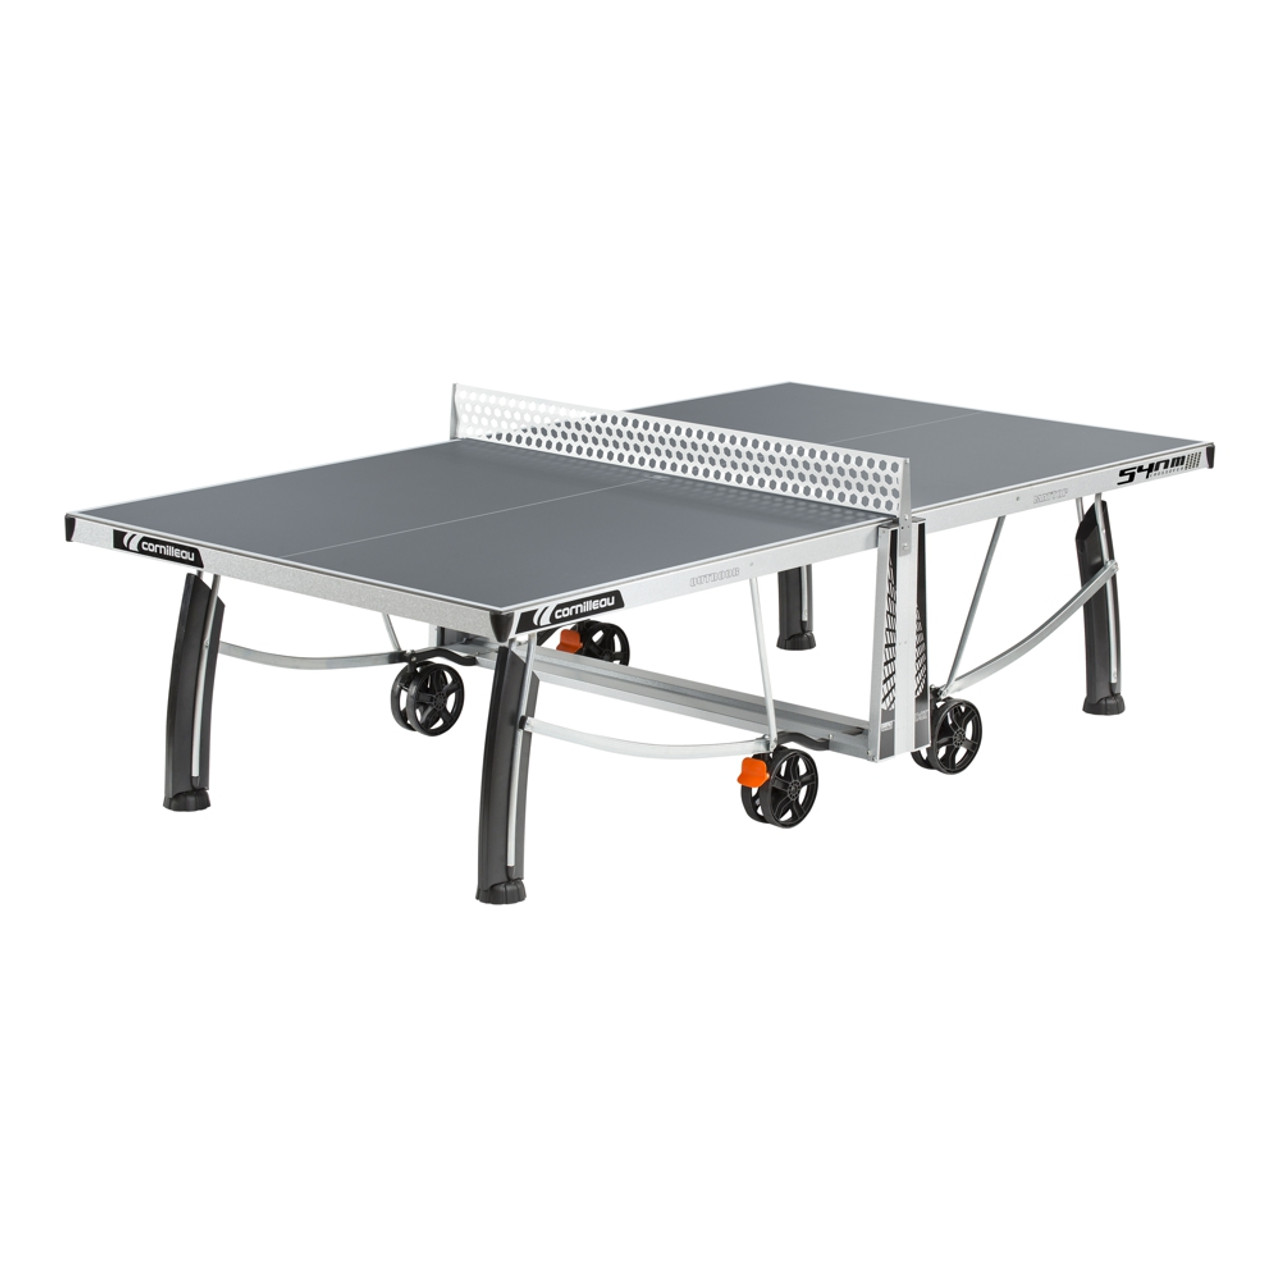 Cornilleau Pro 540M Crossover Indoor/Outdoor Table Tennis | Free Local  Delivery | Gebhardts.com